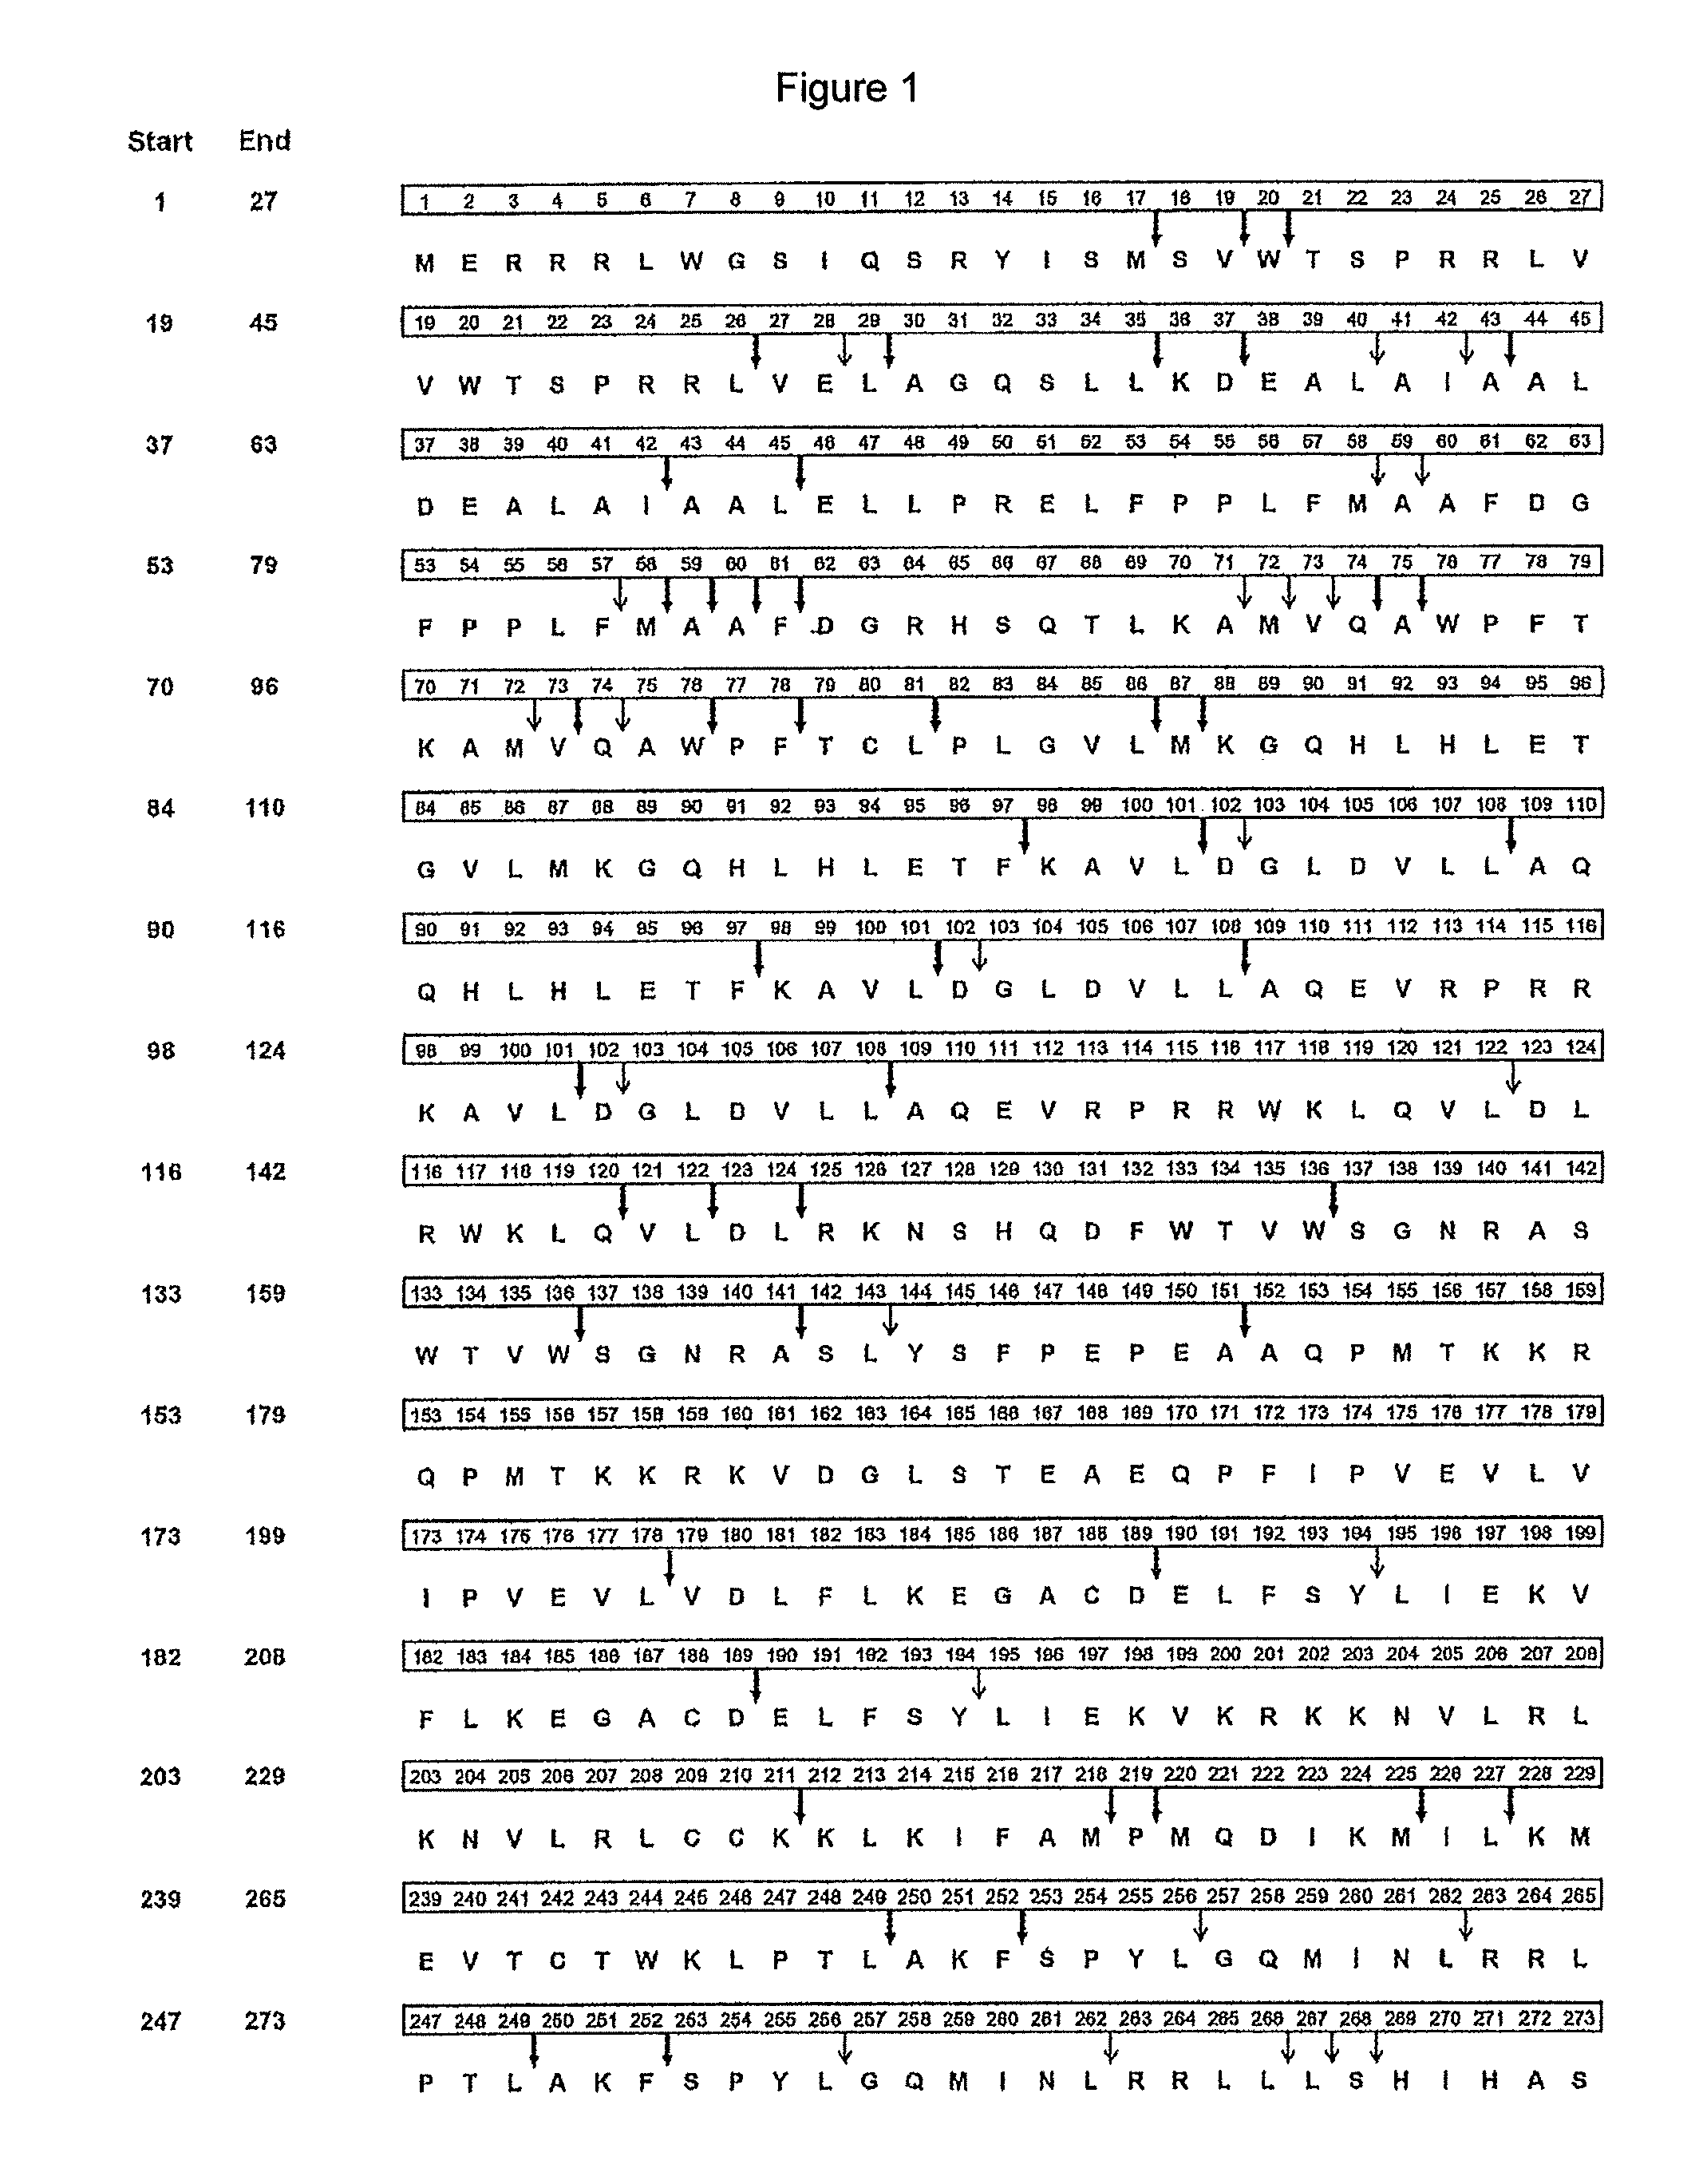 PRAME derived peptides and immunogenic compositions comprising these